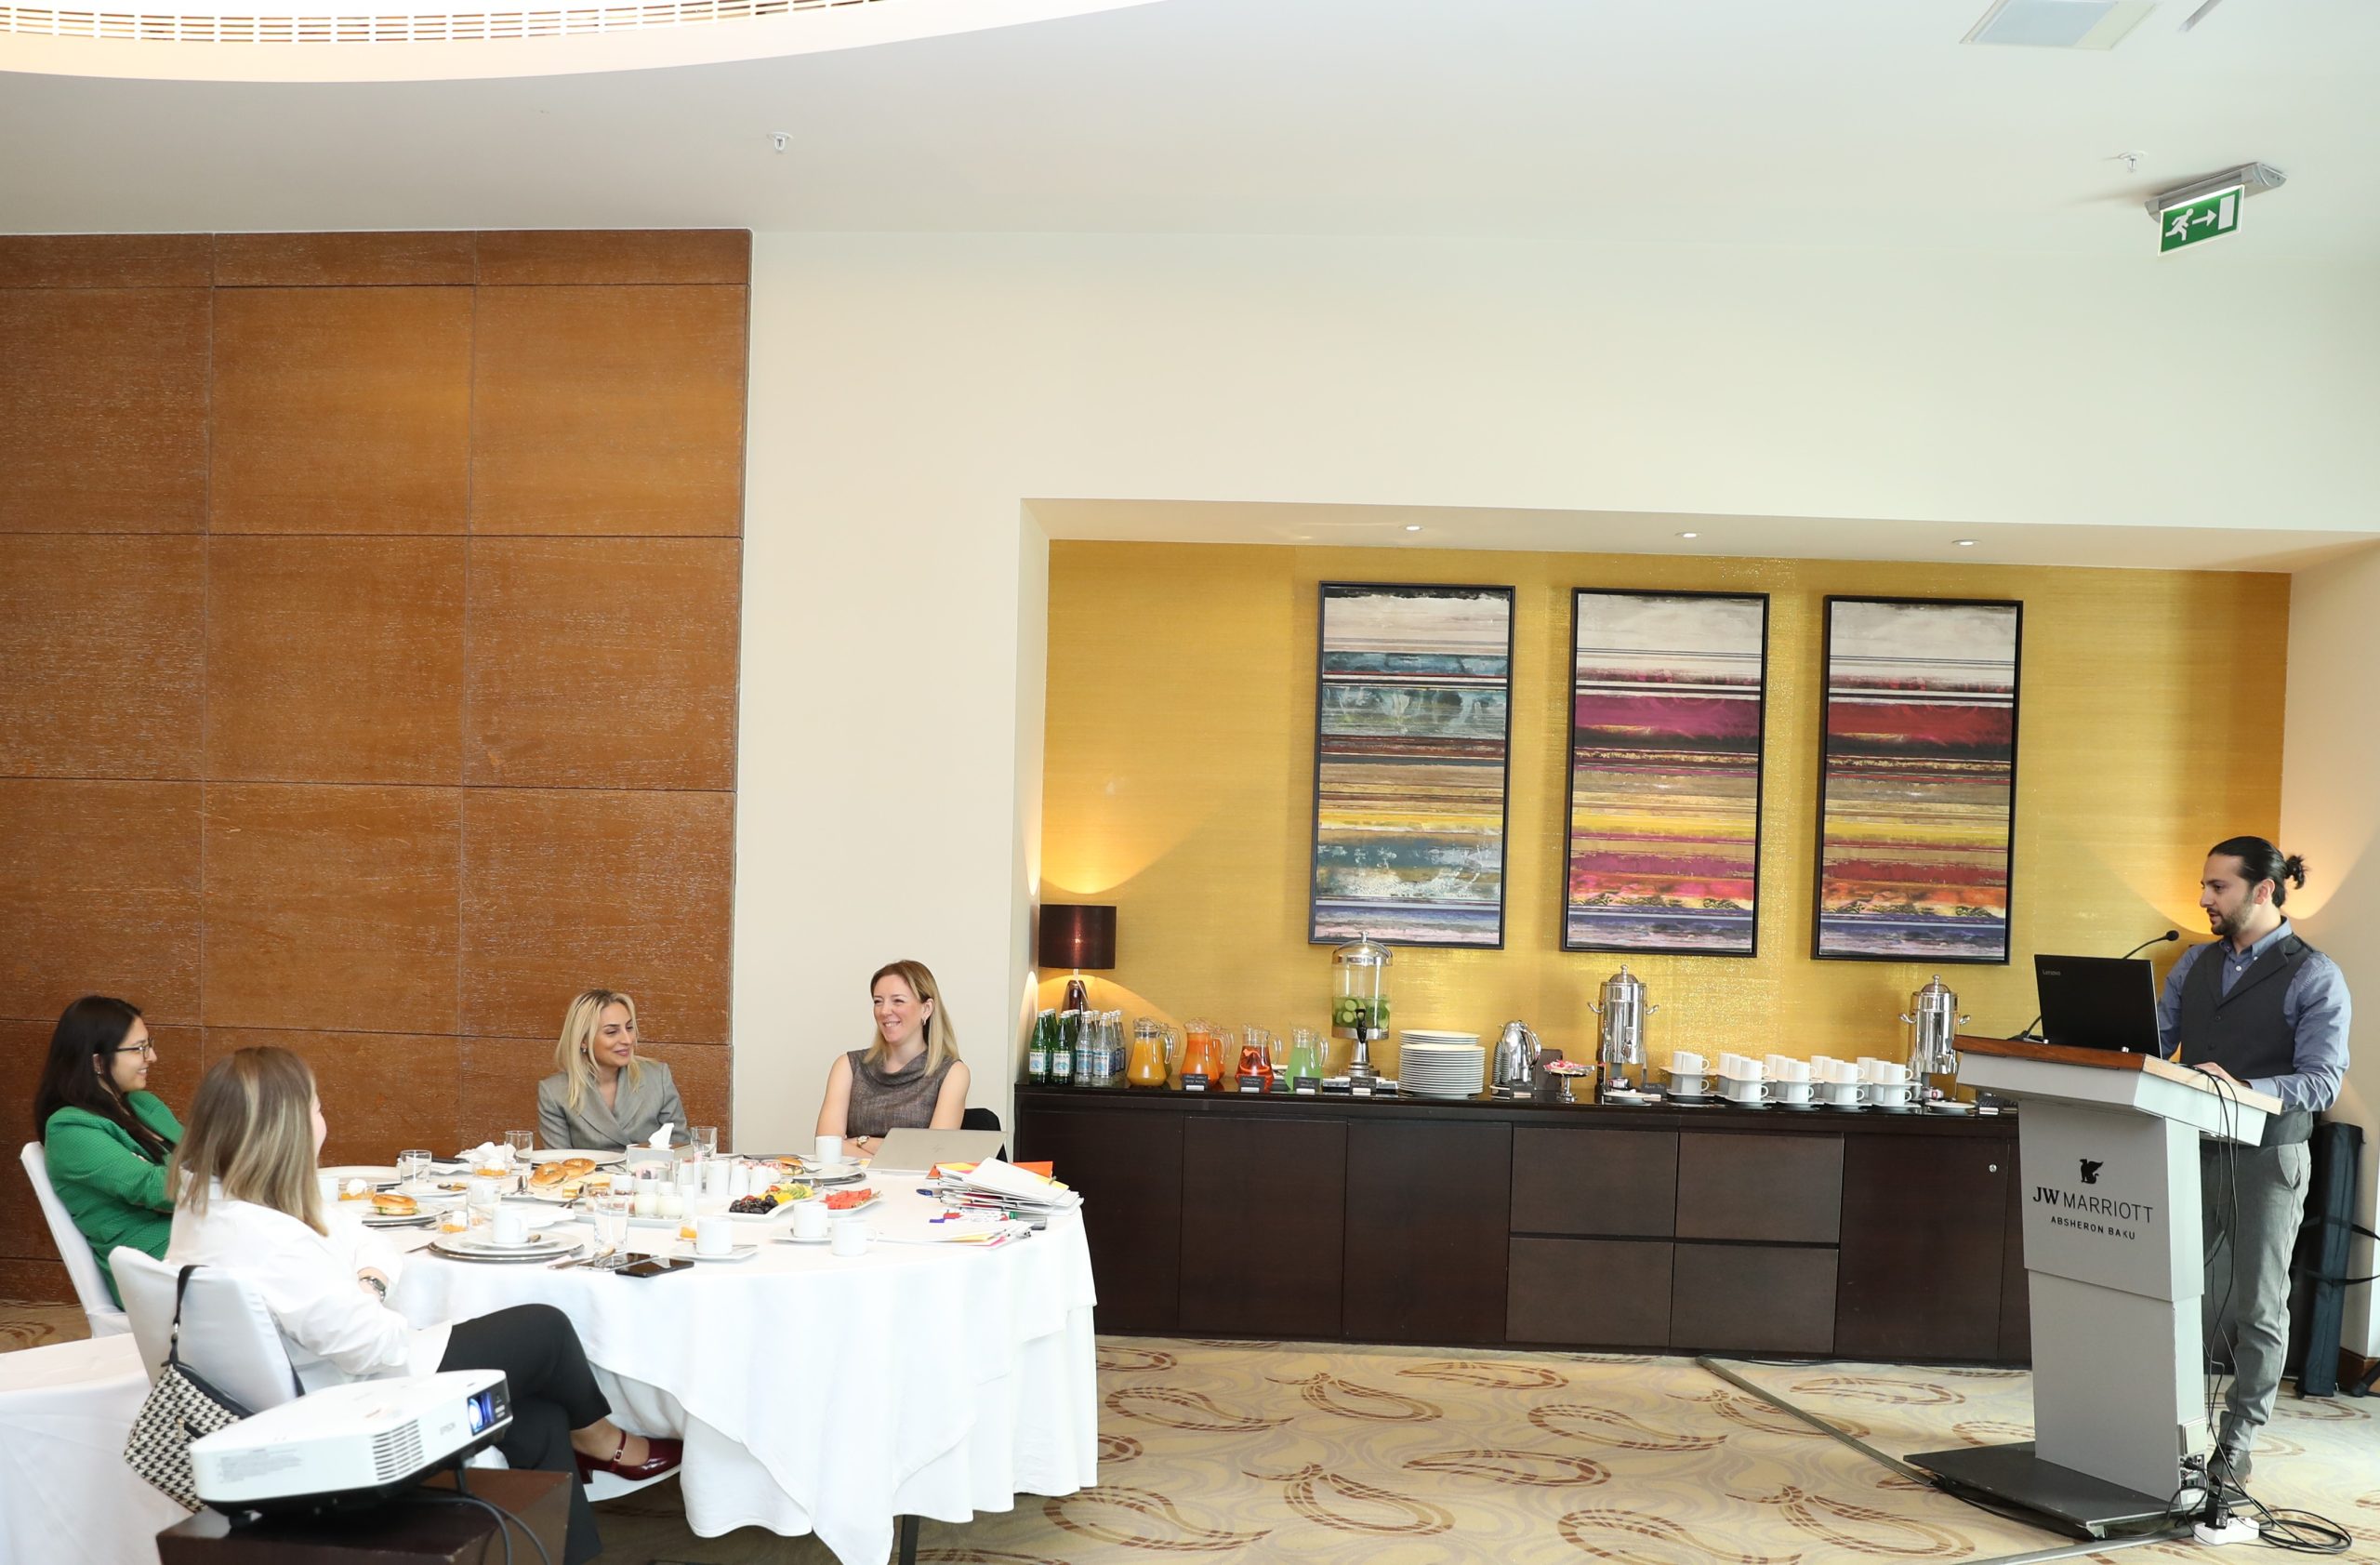 AFchamber HR Committee Organized “HR Meetup Breakfast” Event on the topic of “Compensation and Benefits”.